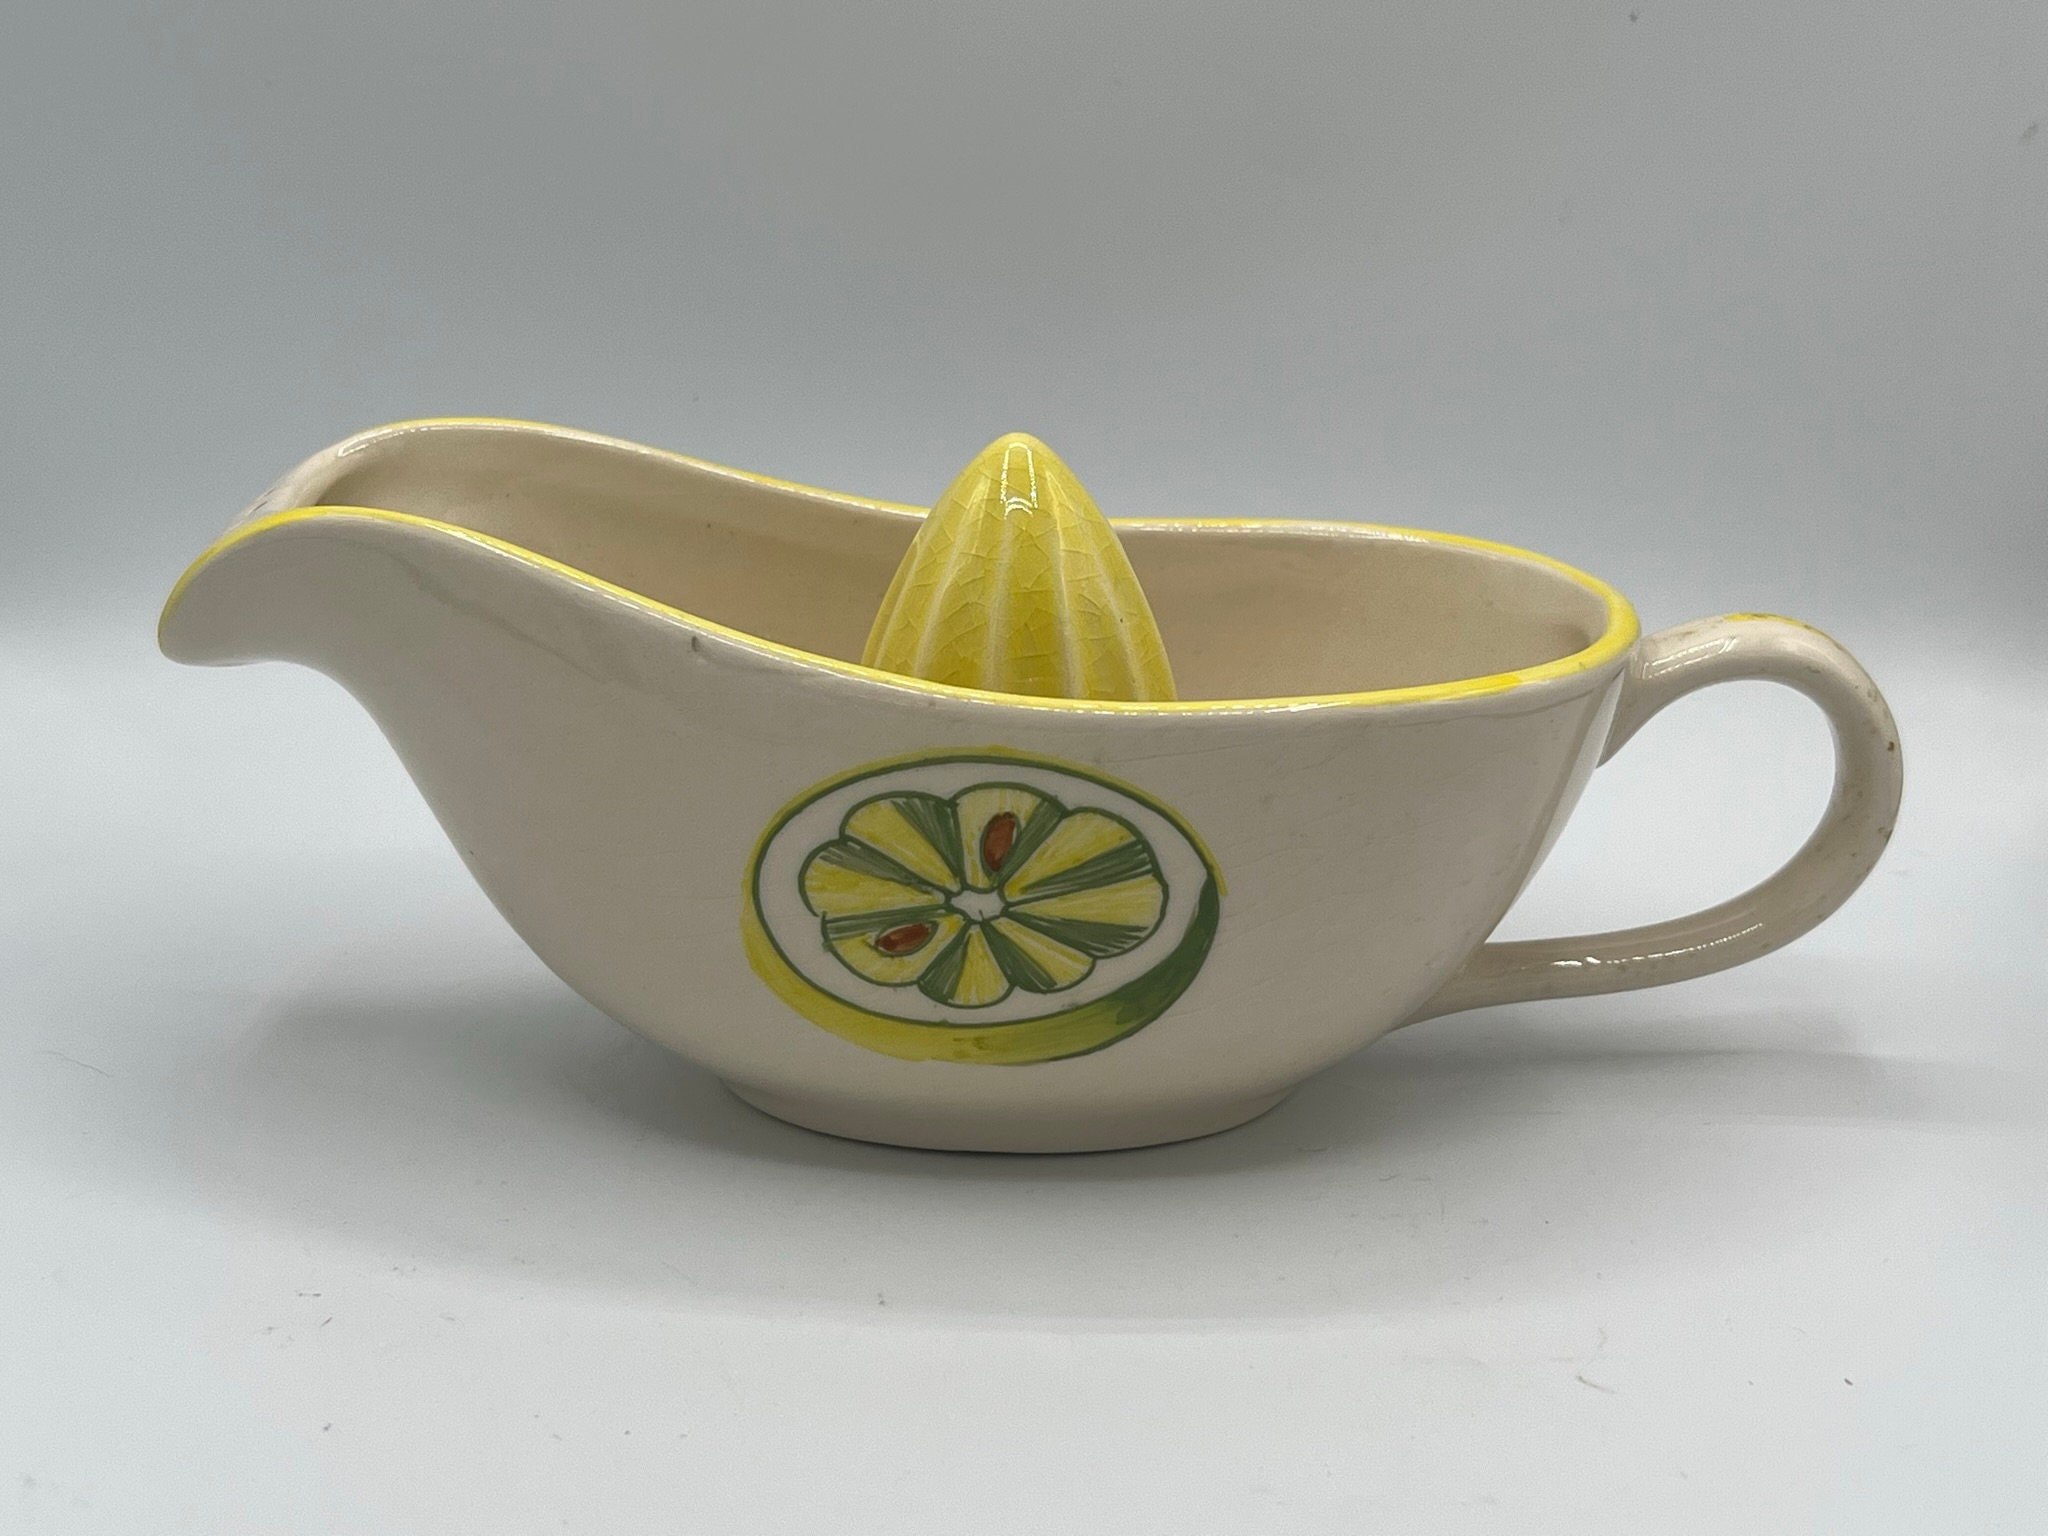 Vintage Sunny Yellow Juicer, Glass Citrus Juicer With 2 Cup Container,  Citrus Reamer, Vintage Cooking Accessory -  Finland